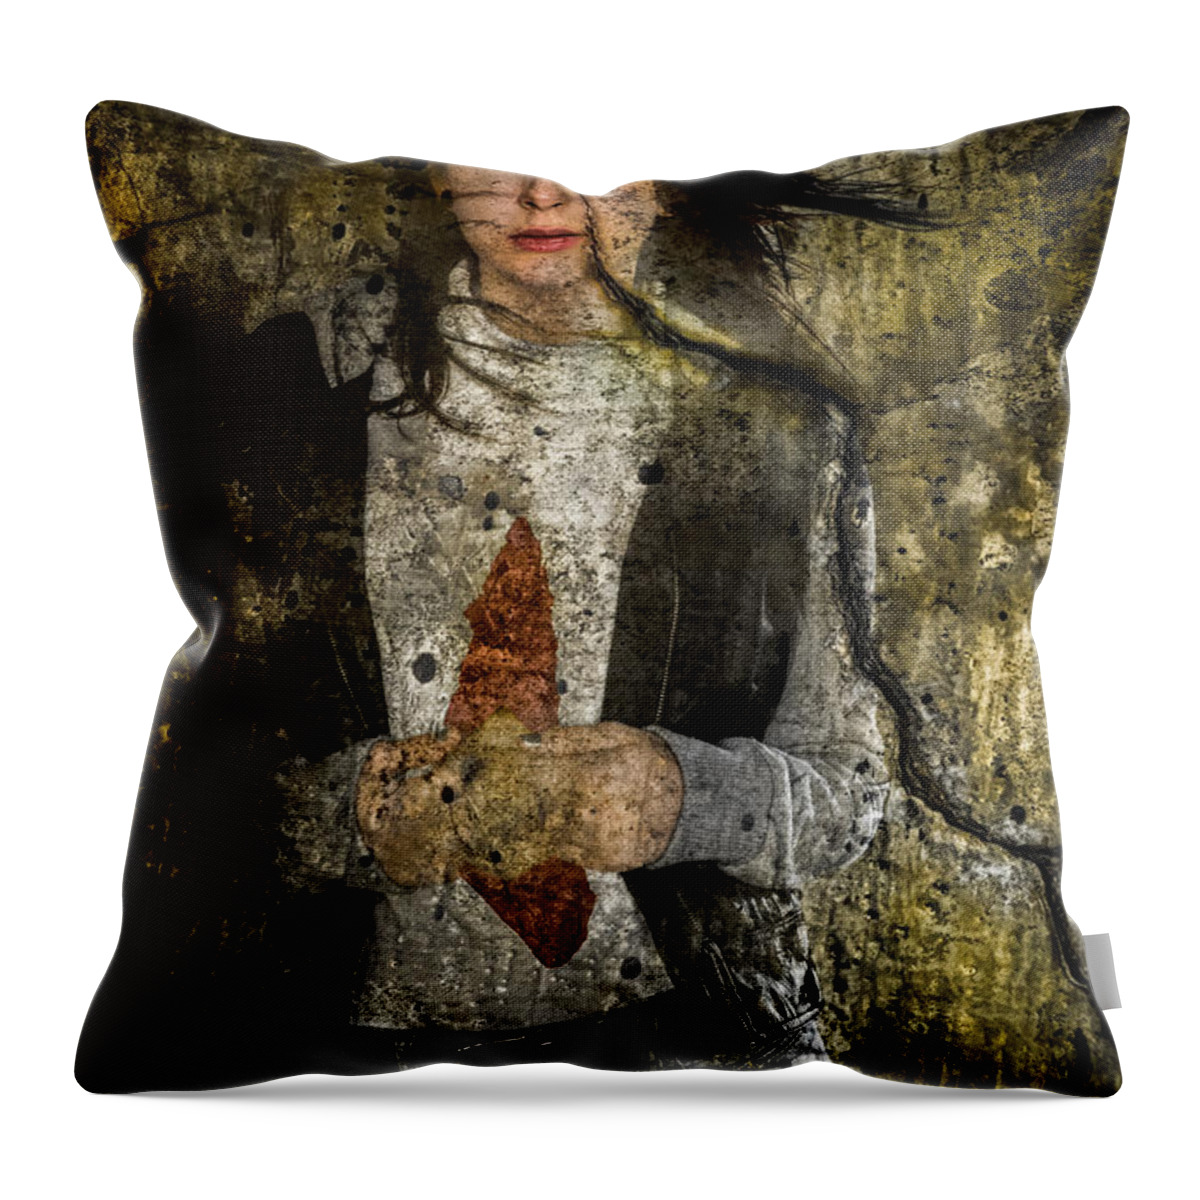 Kayla Throw Pillow featuring the photograph Urban Decay 4 by Michael Arend